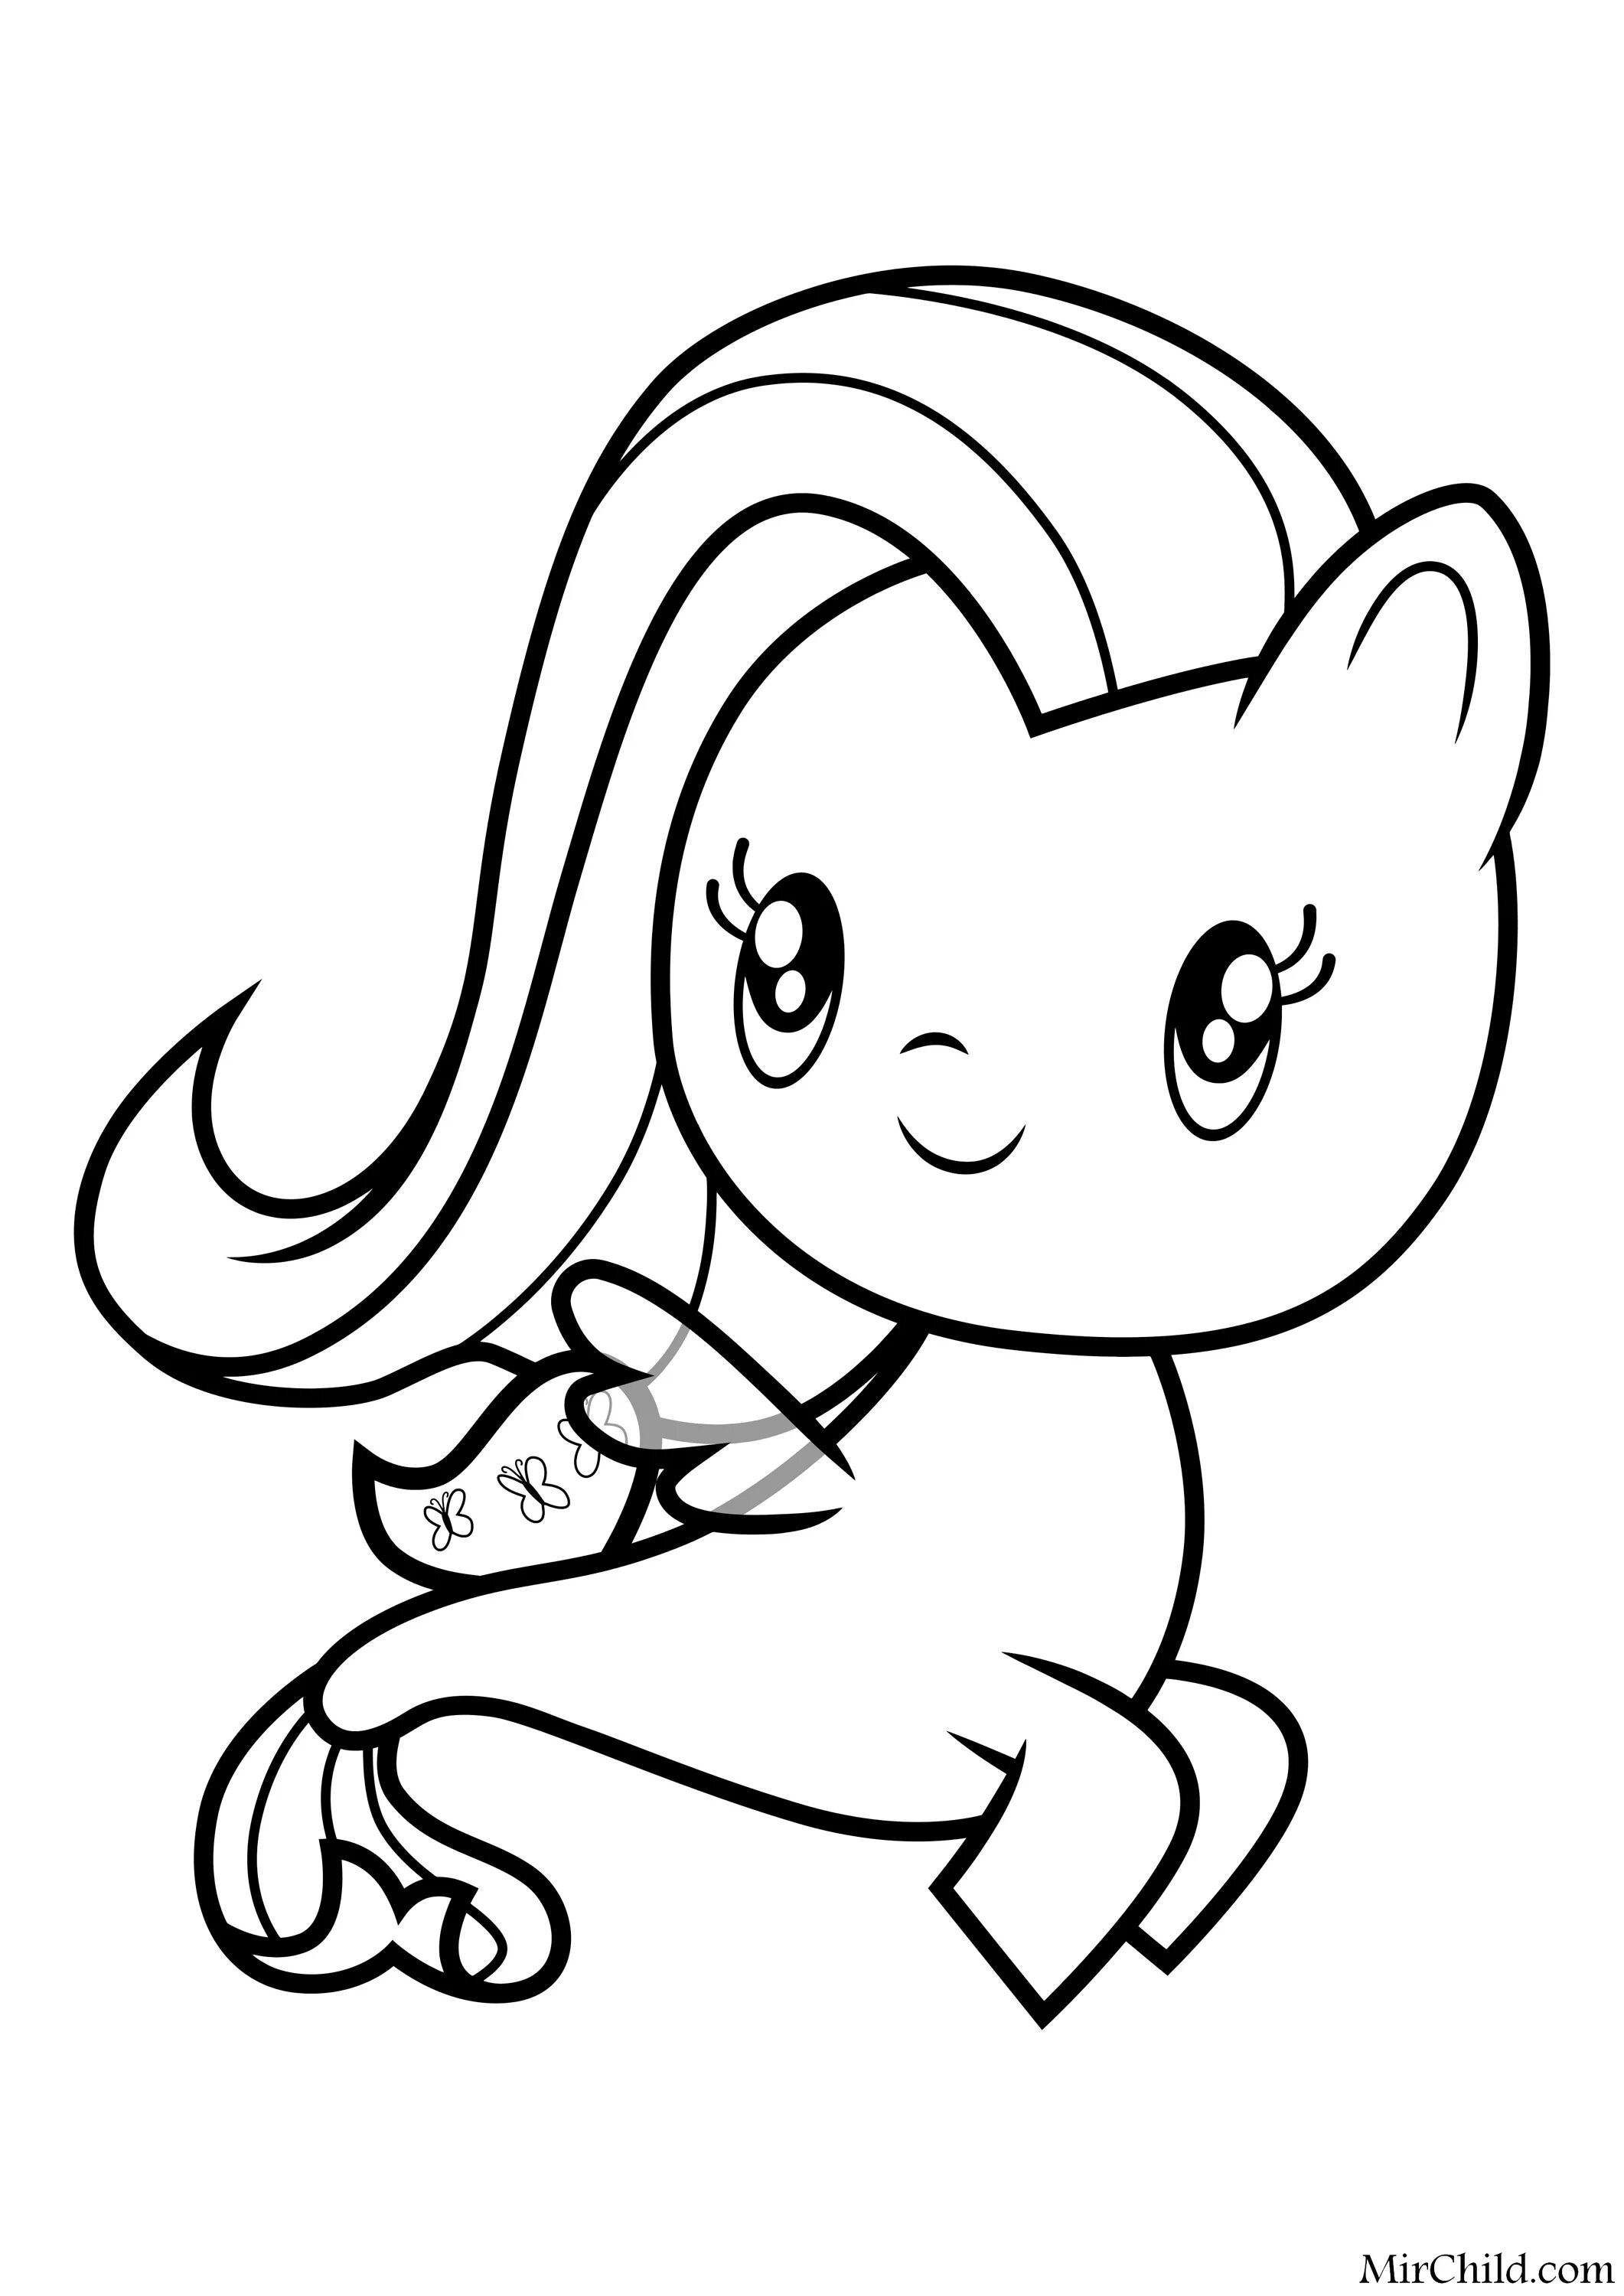 Coloring page glowing cute pony